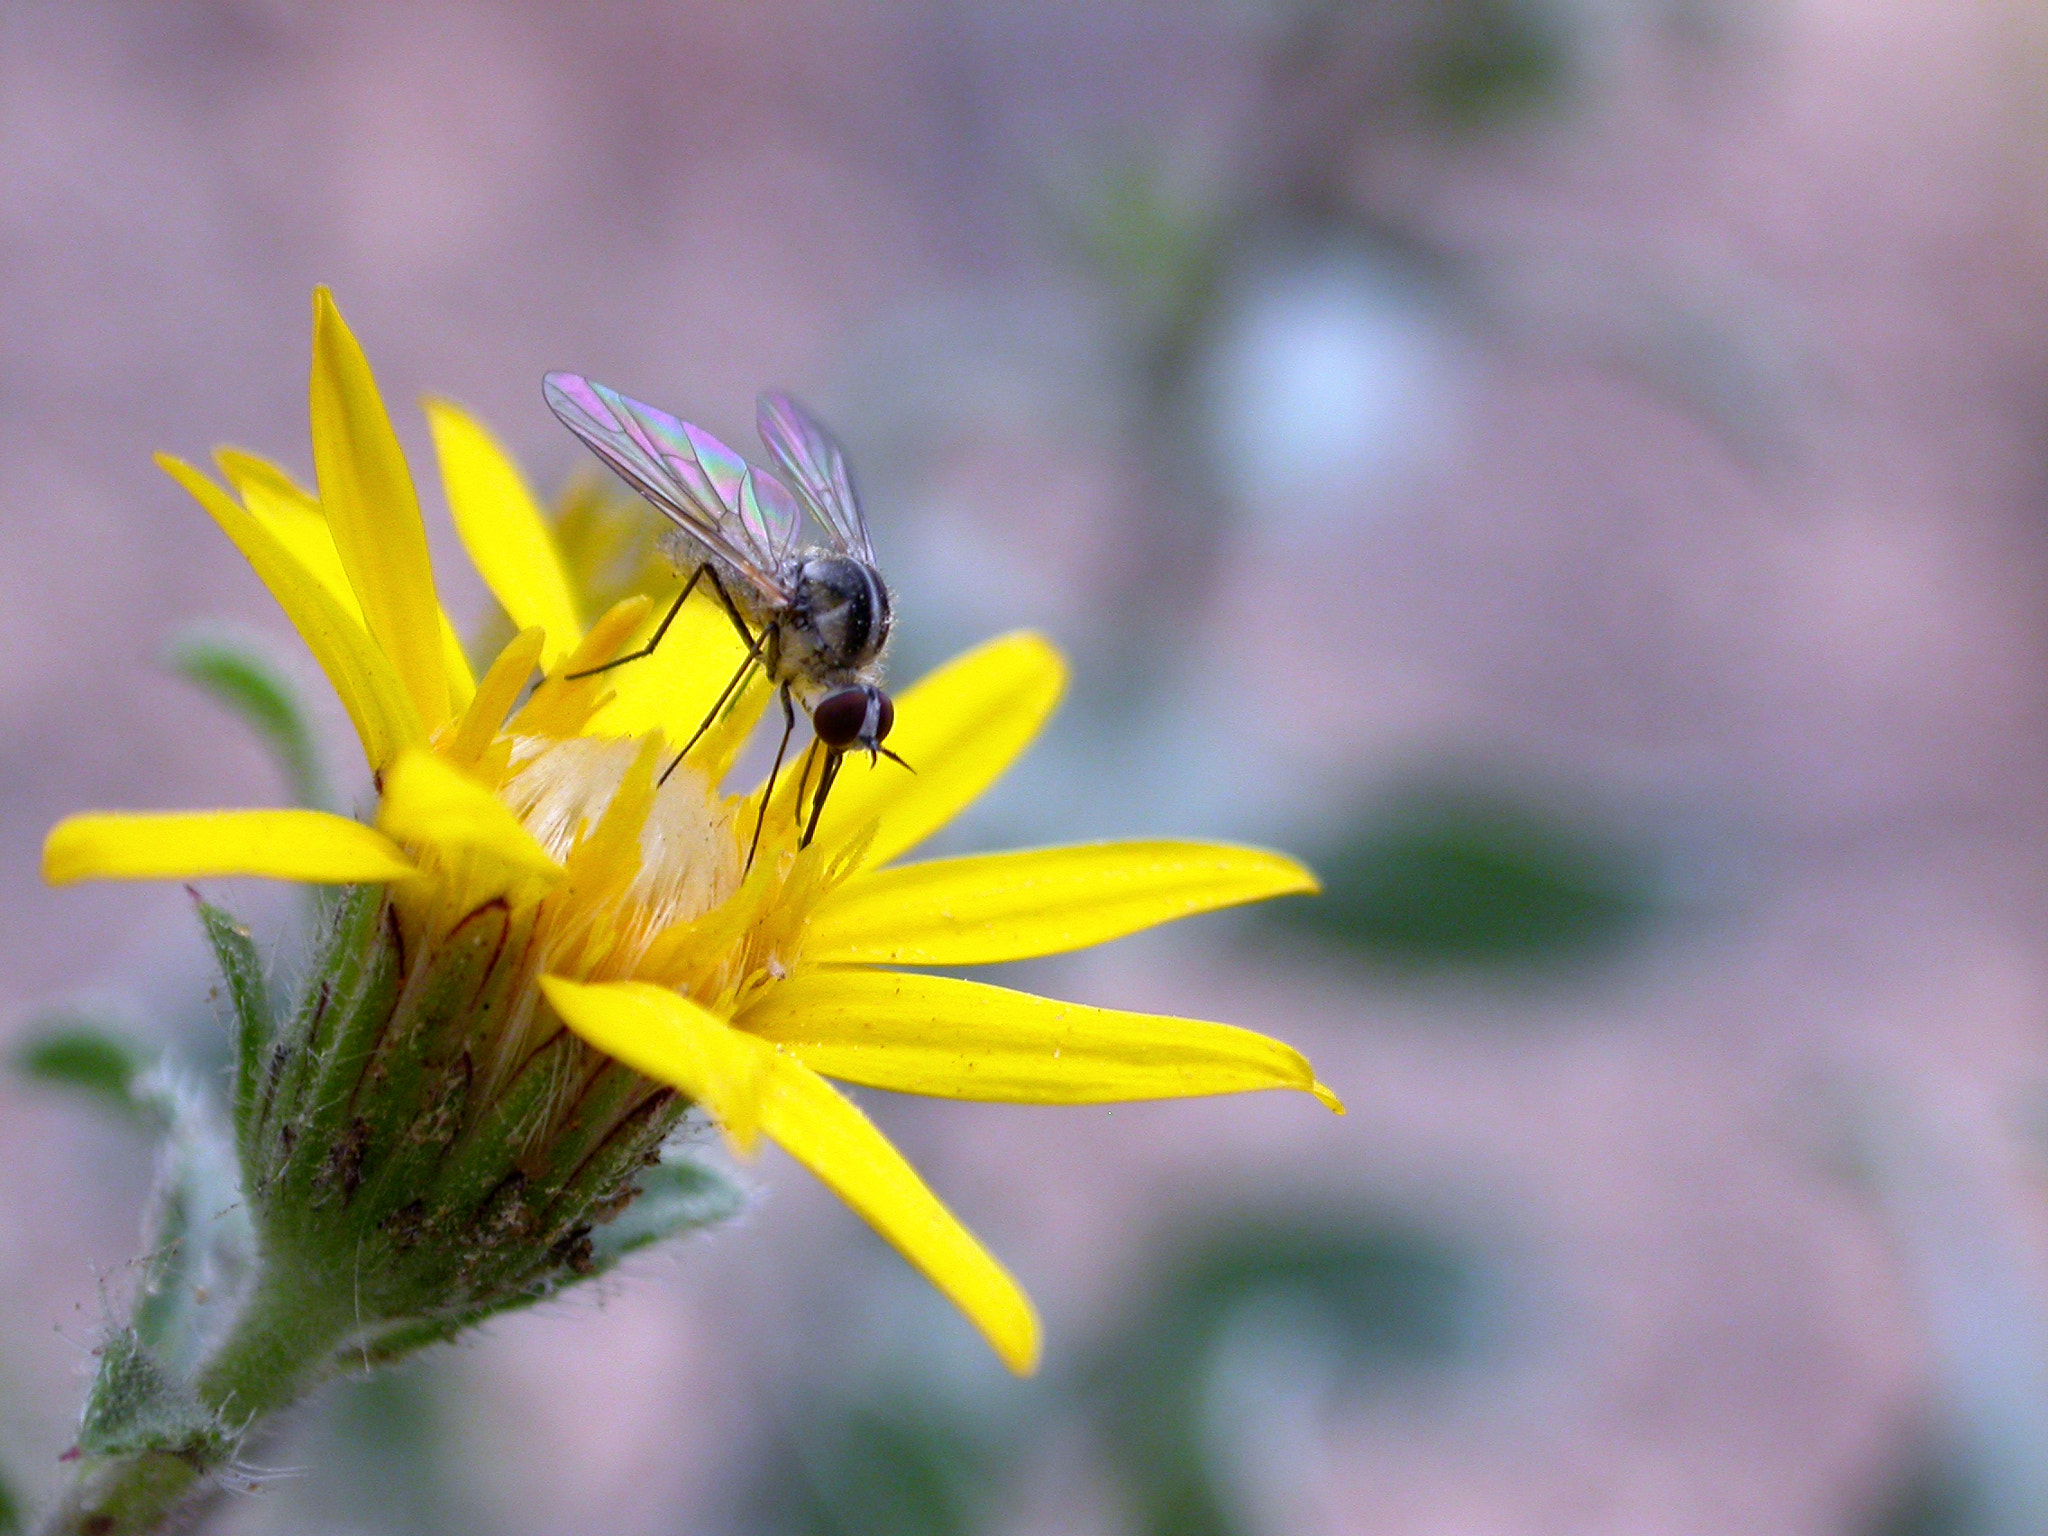 Nikon E4500 sample photo. Flower with insect photography